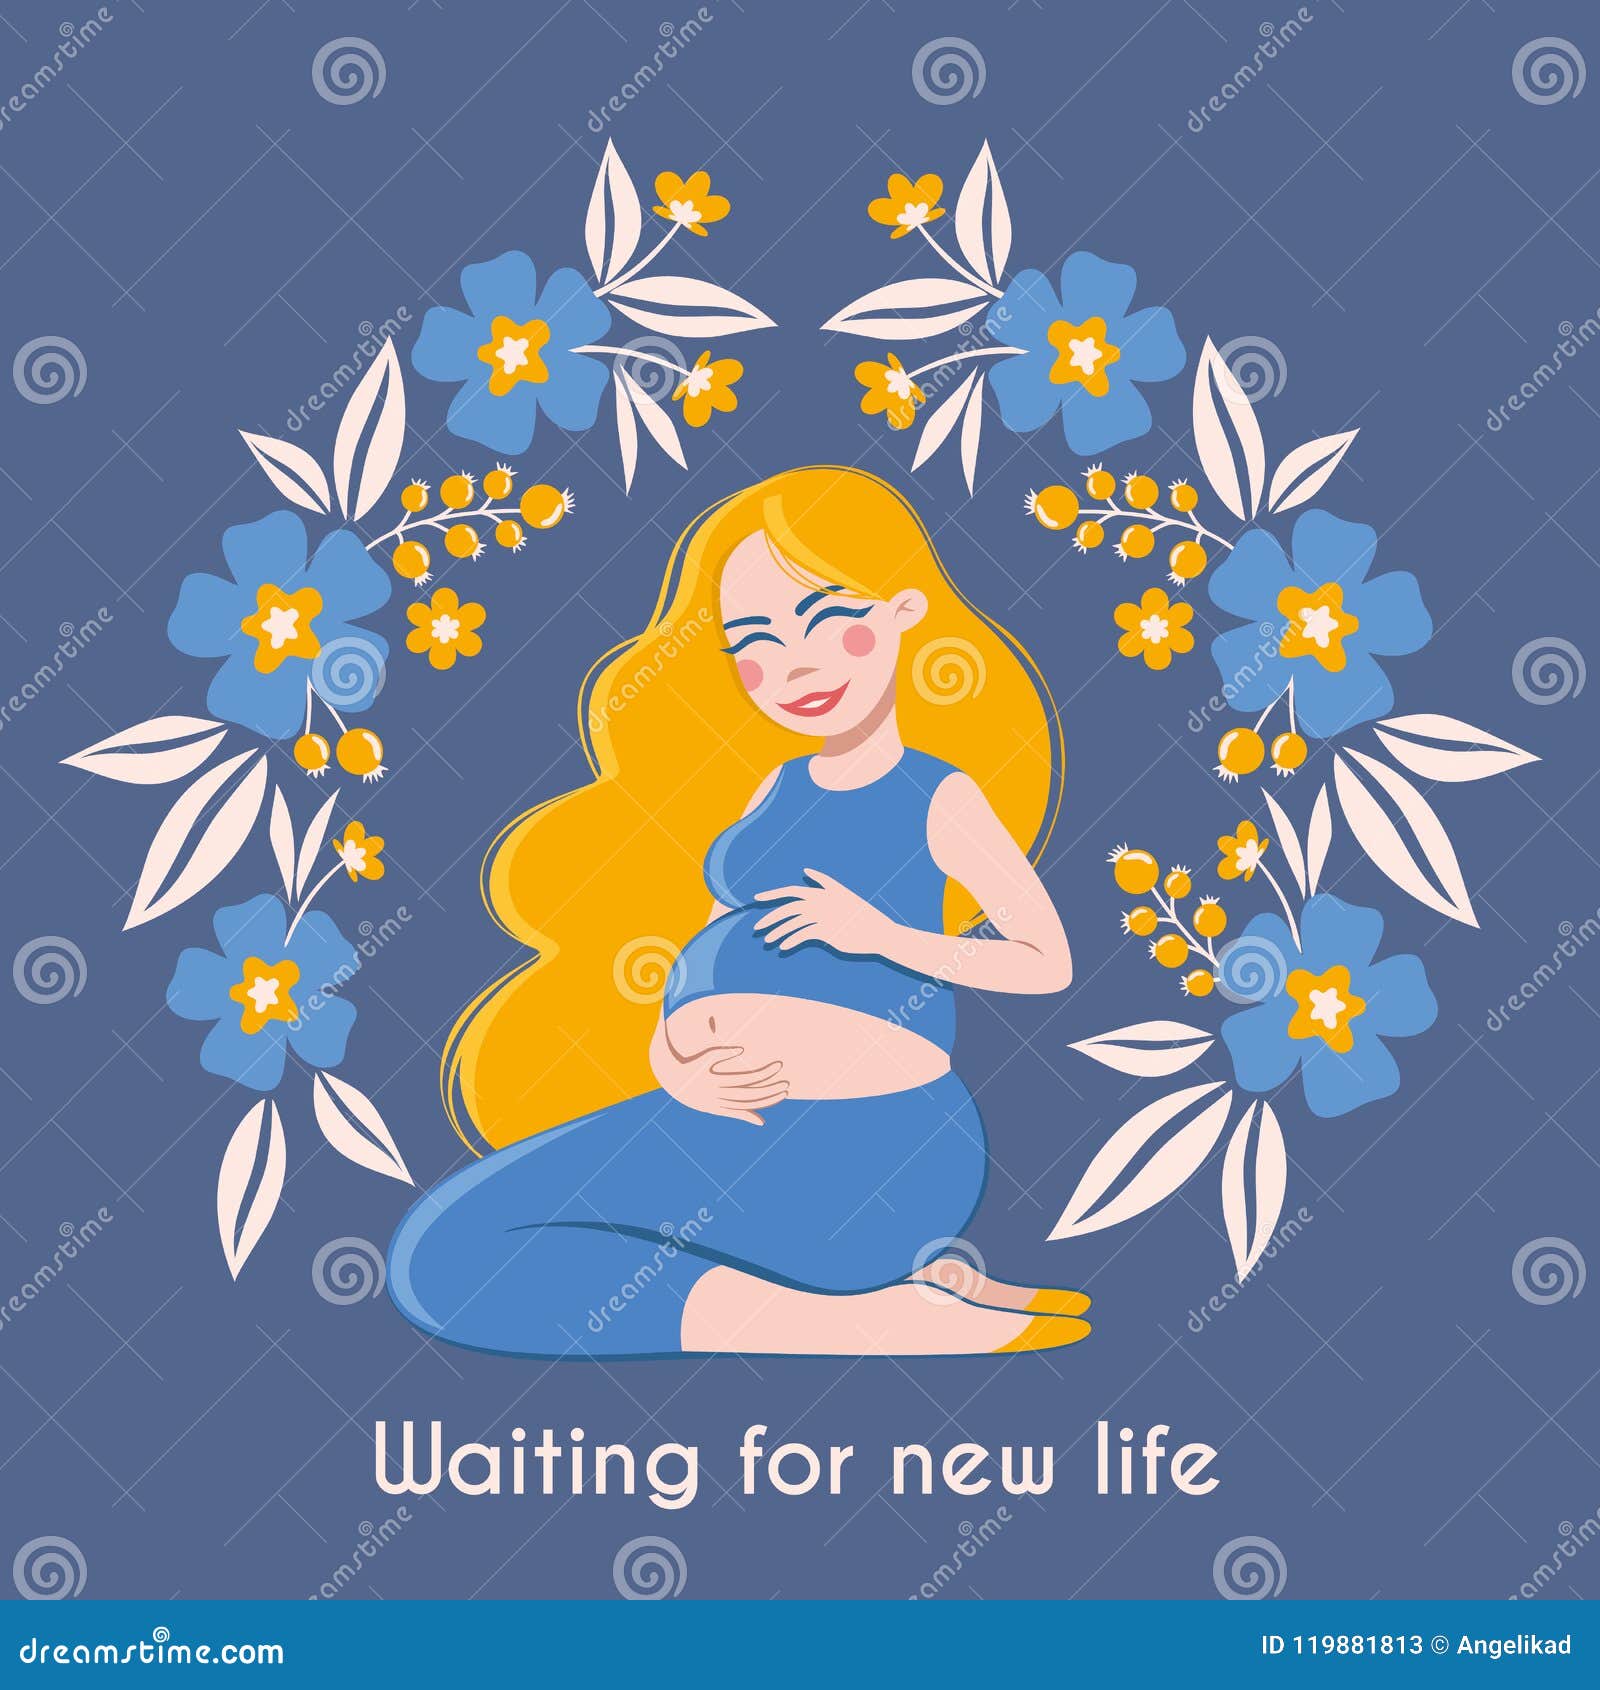 Happy Expectant Mother. Greeting Card with Pregnant Beautiful Woman in  Frame with Flowers Stock Vector - Illustration of childbirth, kick:  119881813